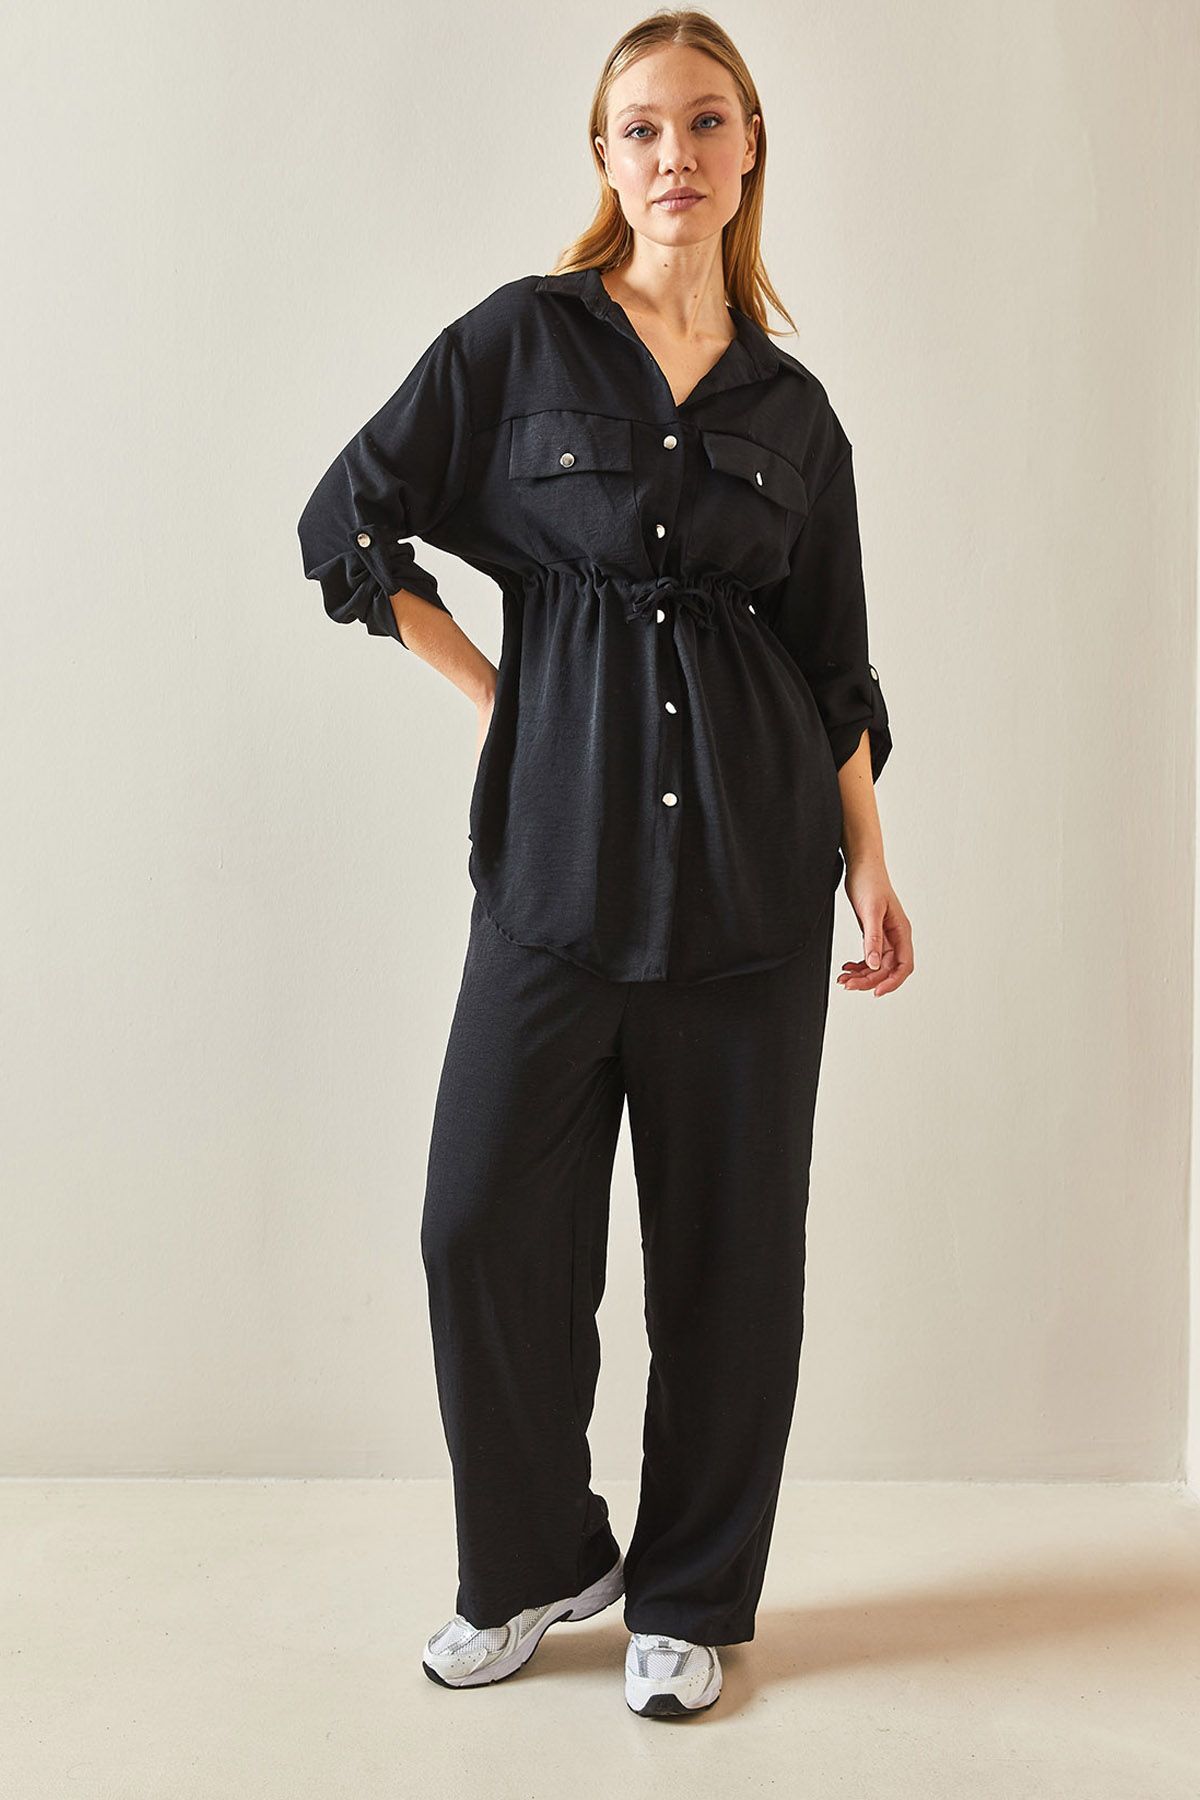 XHAN Black Waist Gathered Double Loose Suit